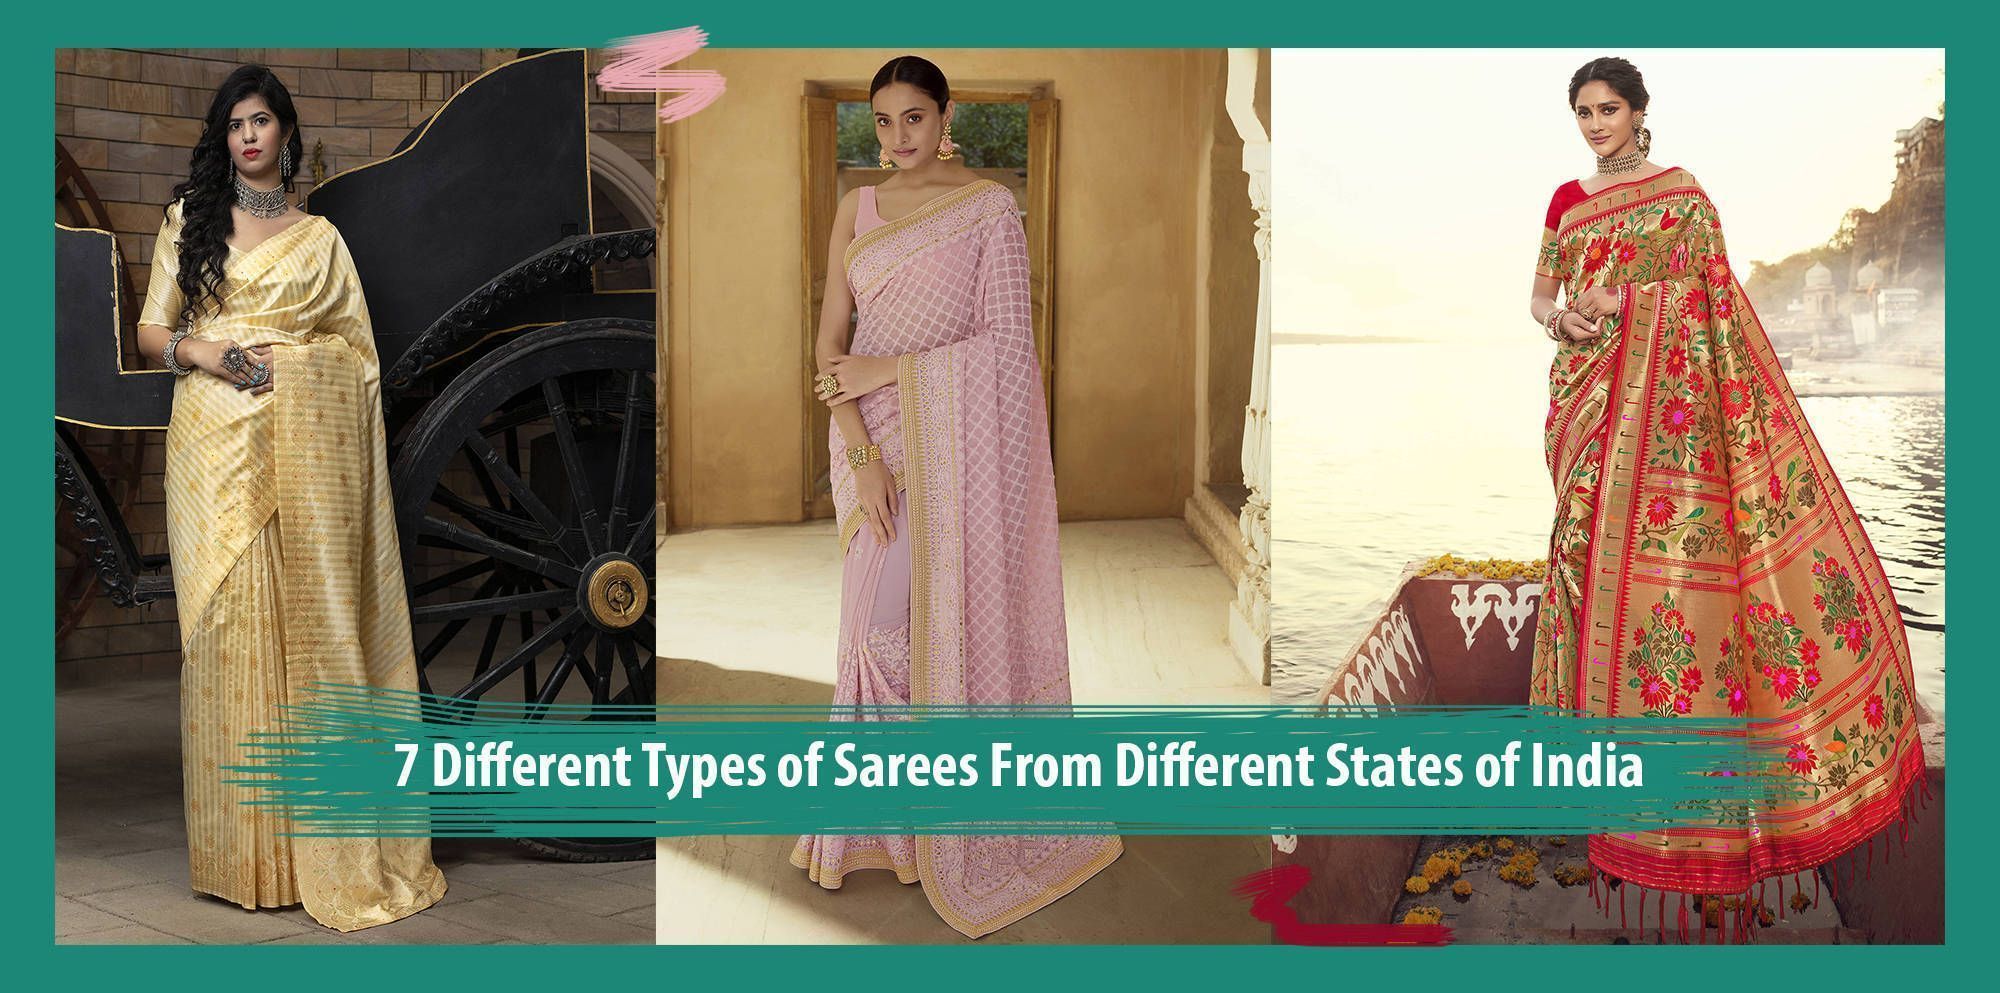 7 Types of Sarees From Different States of India